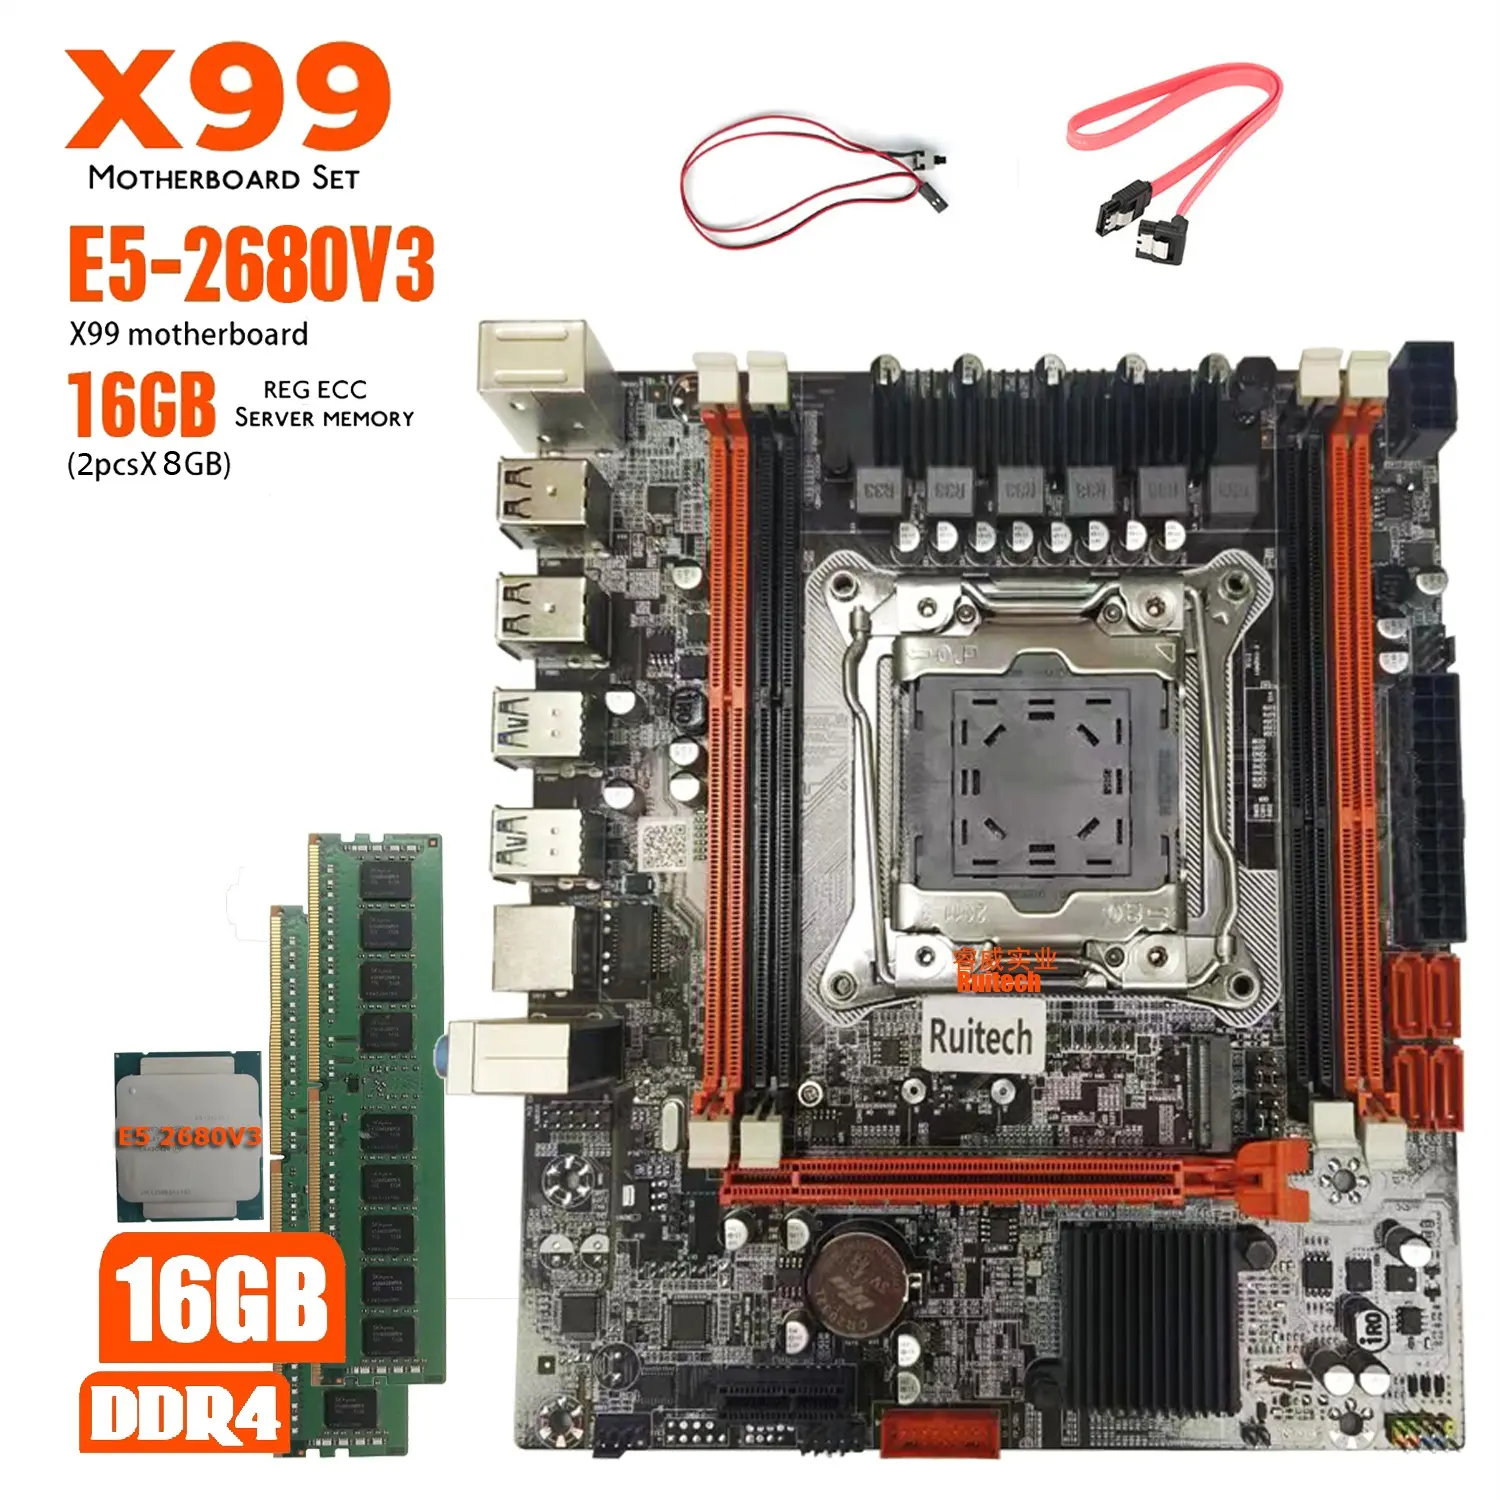 X99 Motherboard Set LGA 2011-3 Kit With Xeon 2680V3 CPU 16GB (2*8G) DDR4 M-ATX NVME M.2 X99D4 motherboard Combos